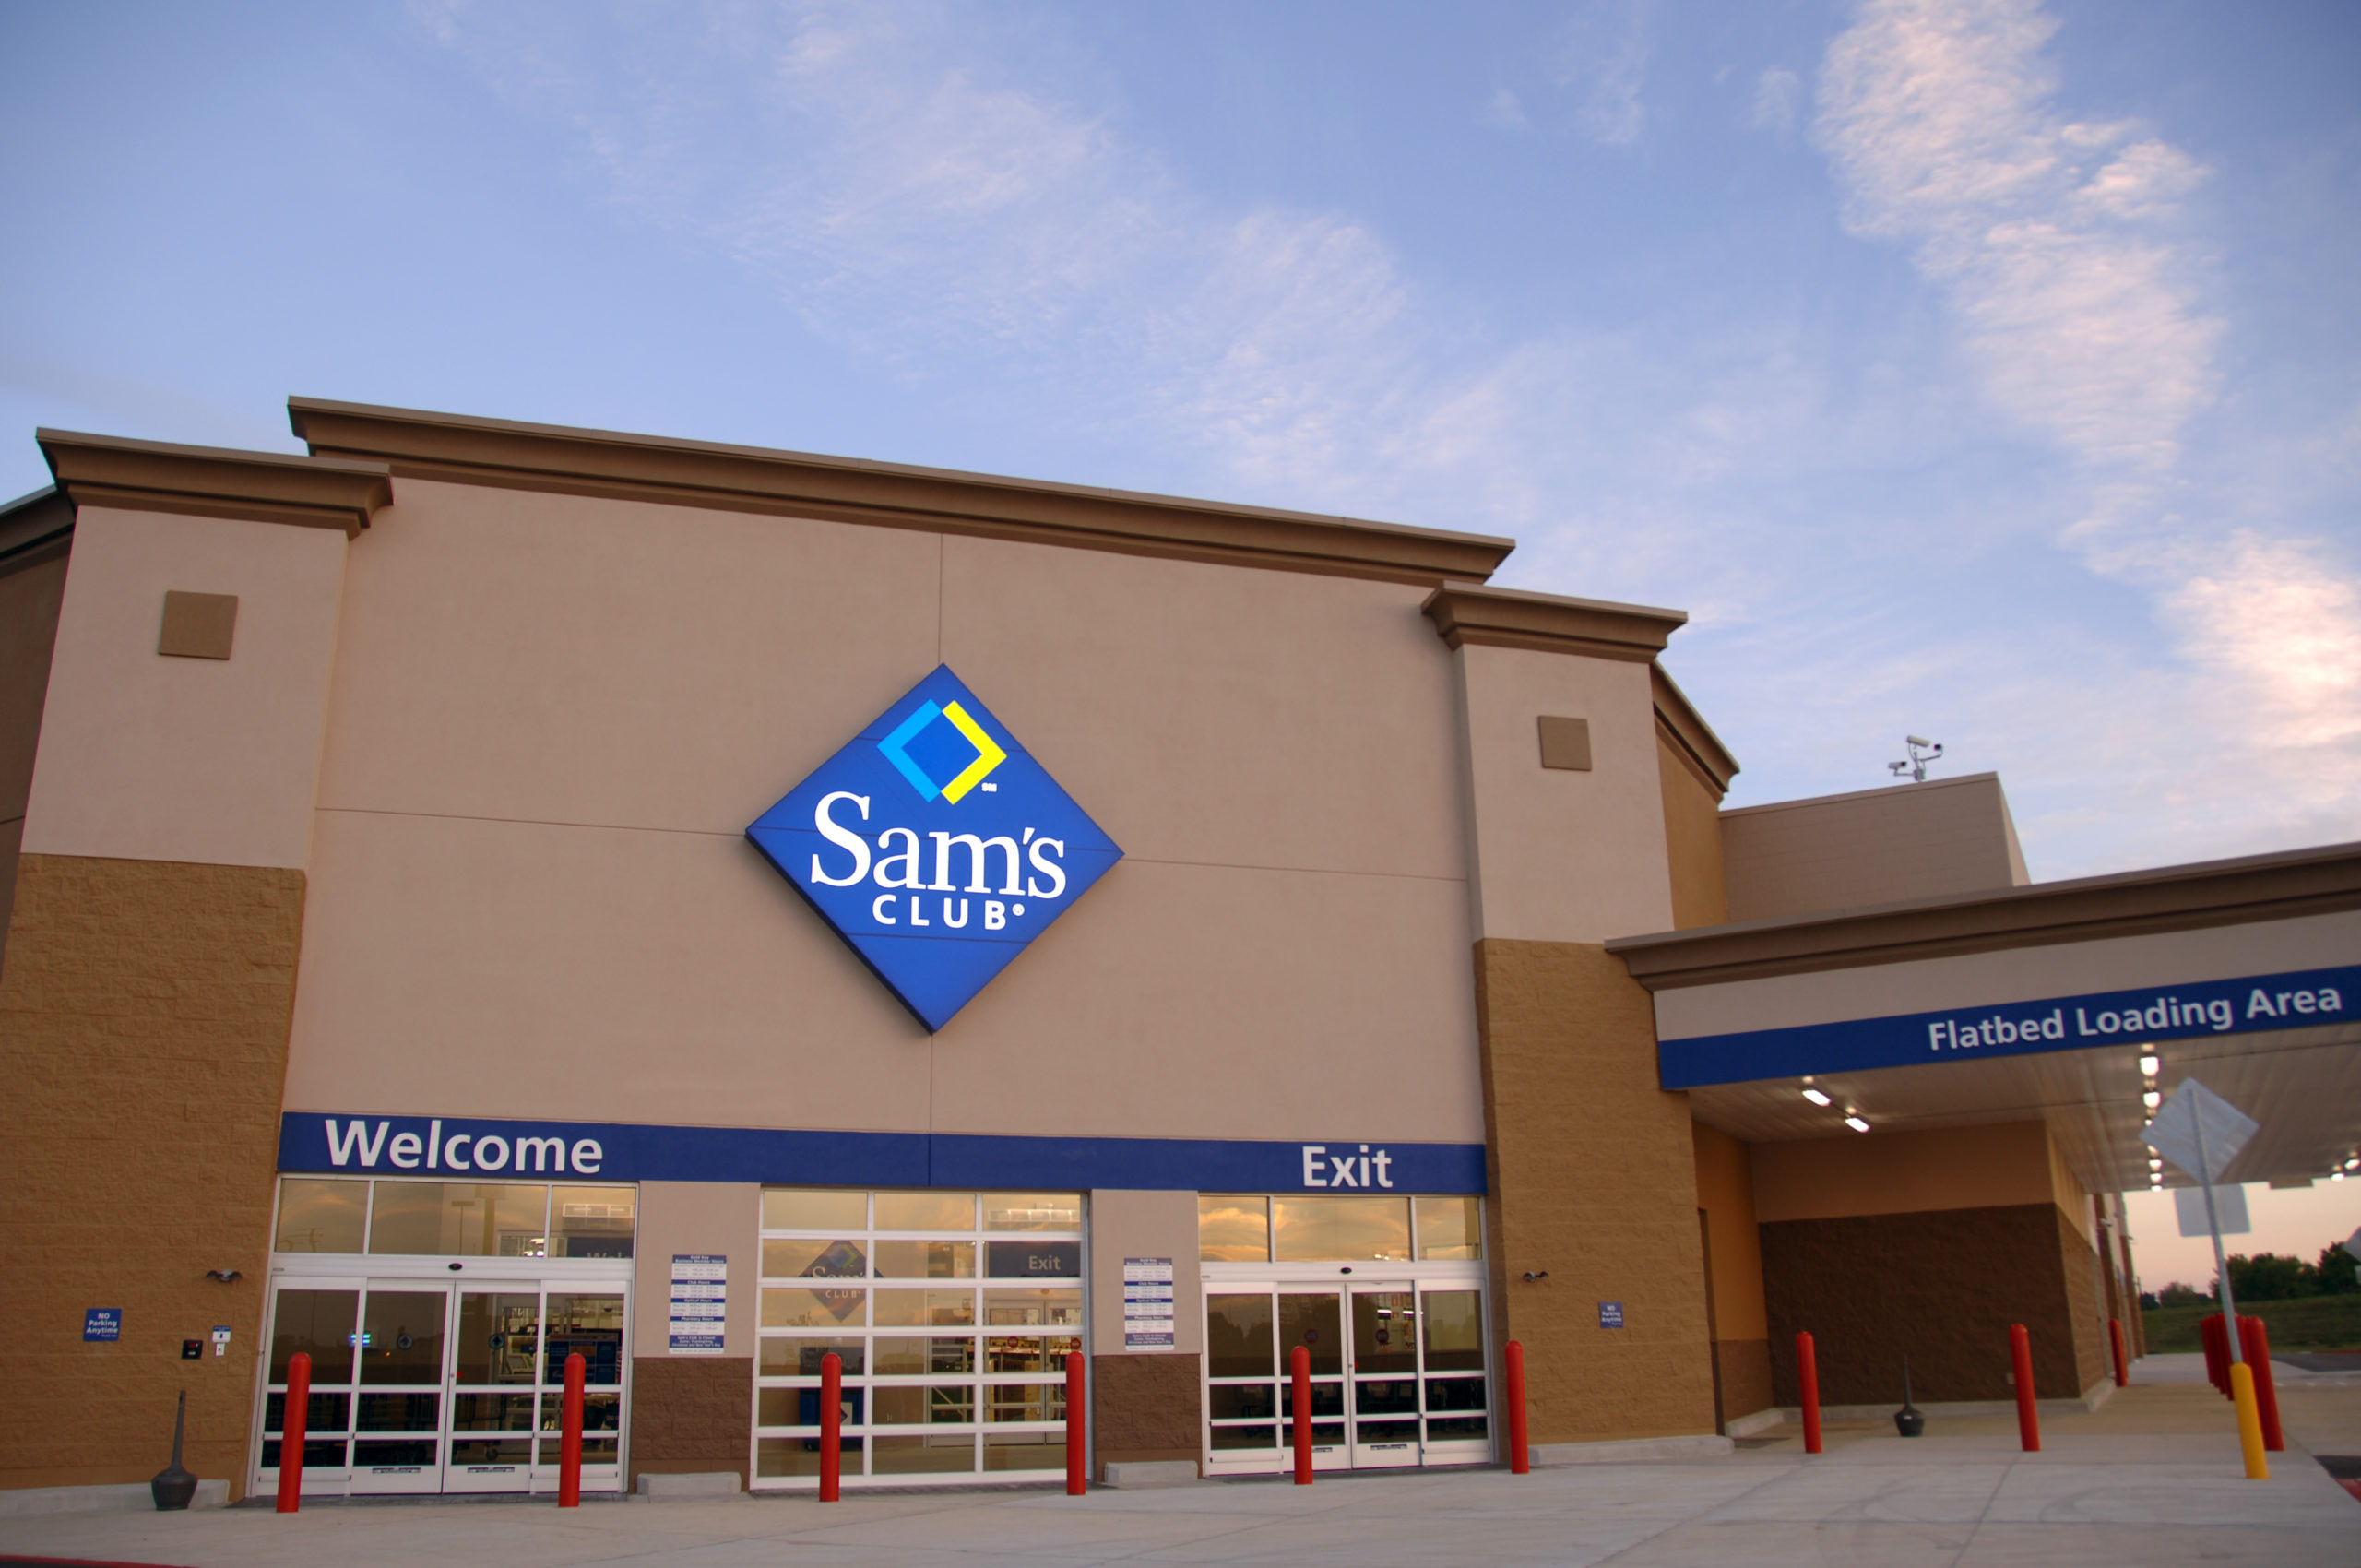 Sam's Club Delivery